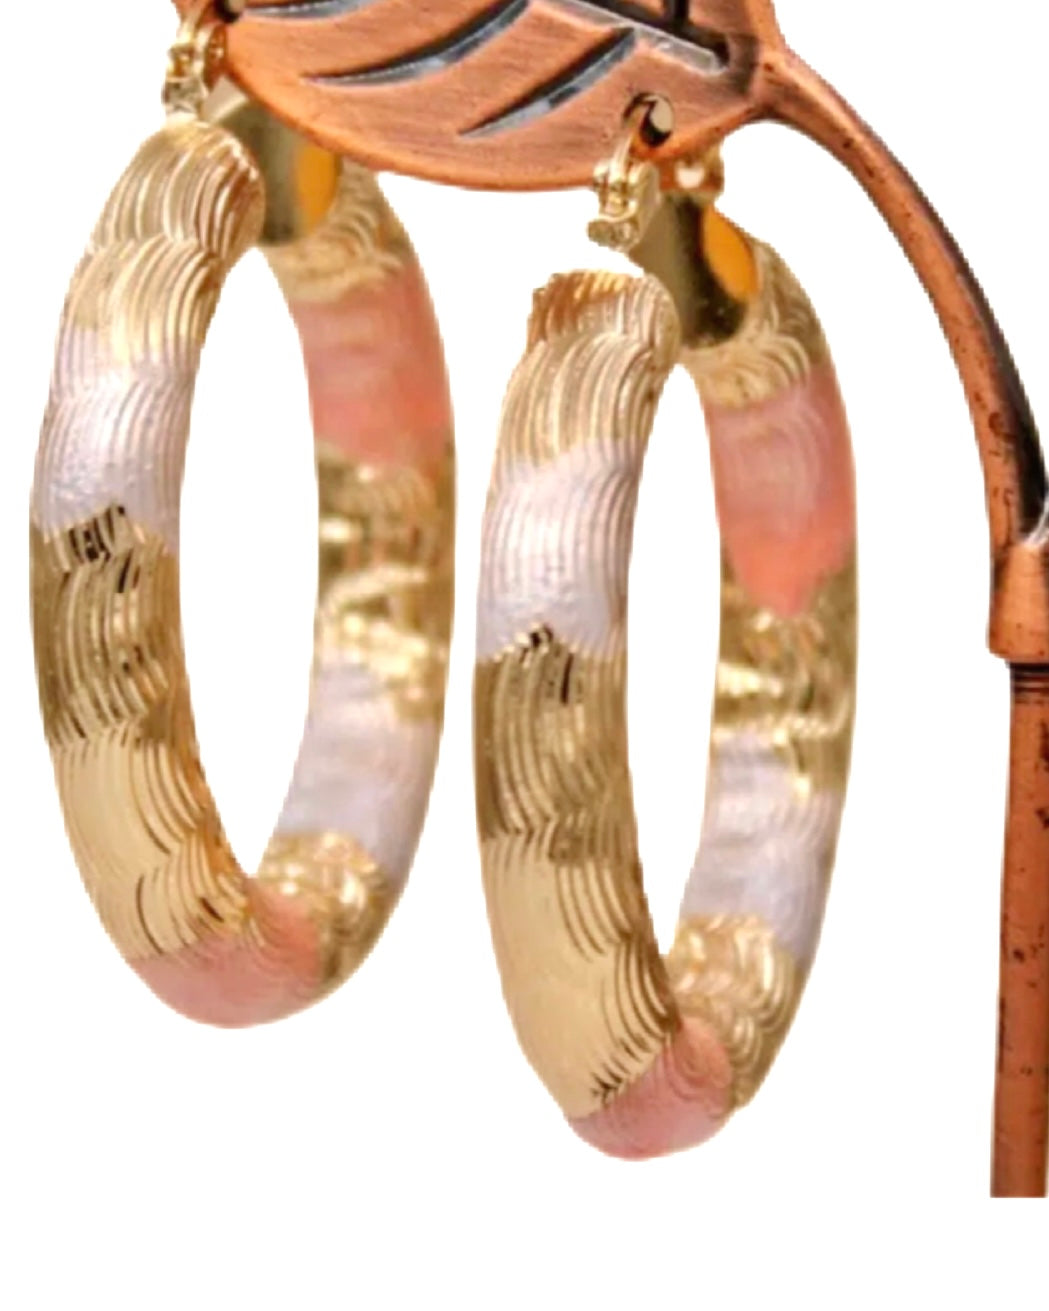 Peach and Brushed Gold Enamel Hoops 1"